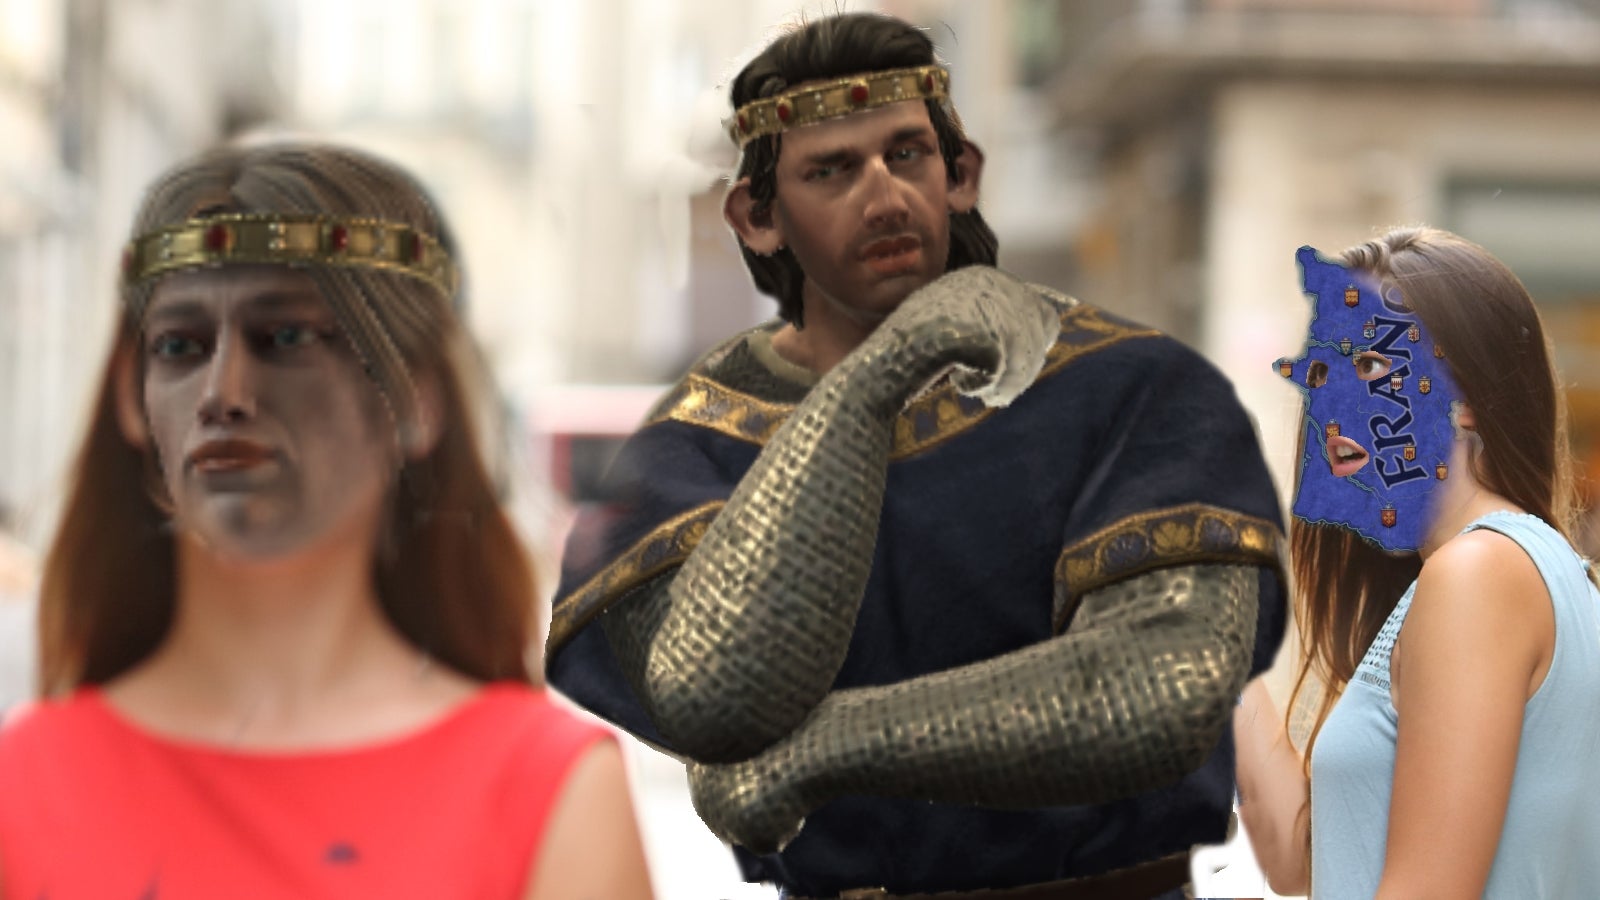 Crude photoshop of the "man looking at a woman in a red dress while his girlfriend looks angrily at him" meme, in which the man is a giant duke, the red dress woman is a blank-faced queen, and the girlfriend is France.